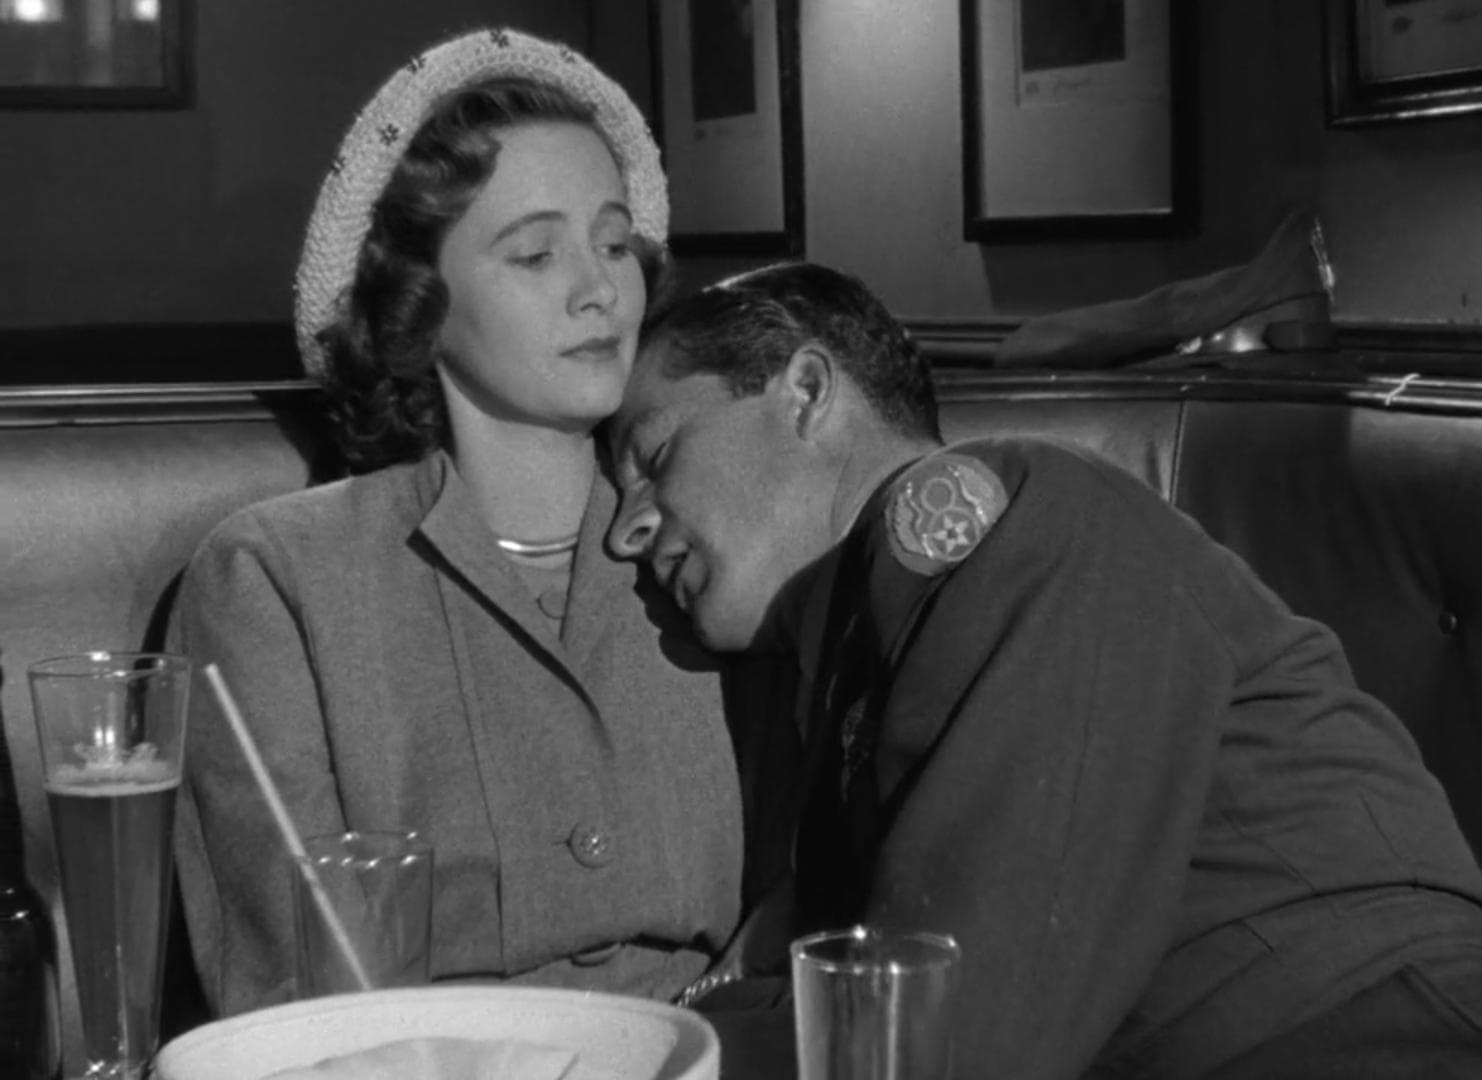 soldier cries on a woman’s shoulder in a diner booth in this photo from The Samuel Goldwyn Company.